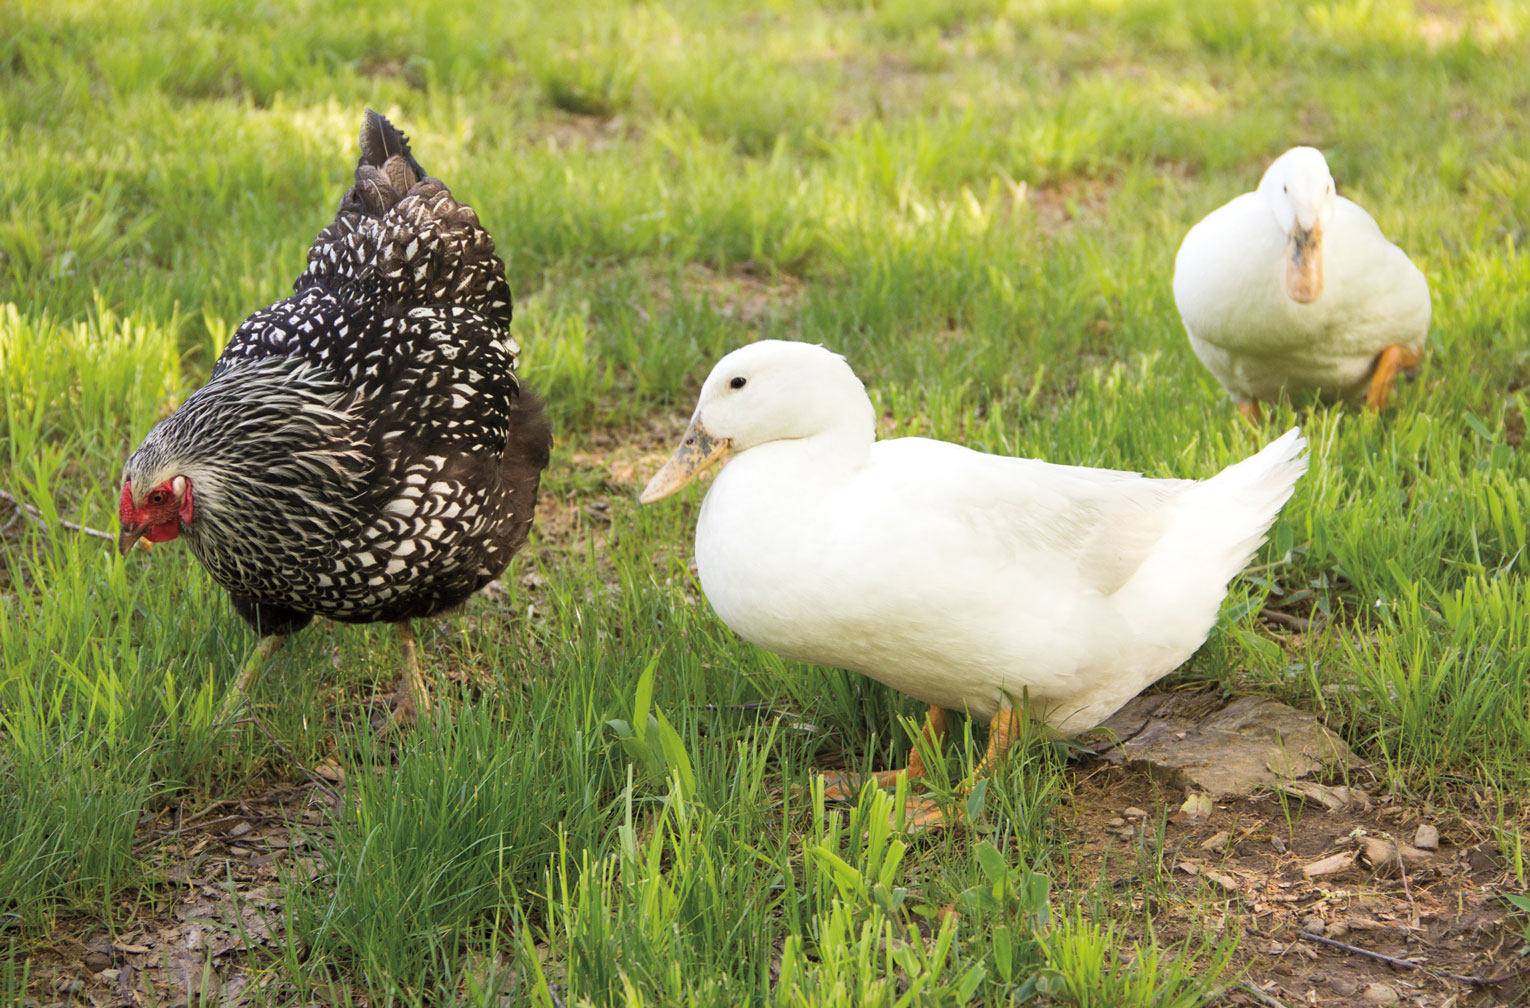 Photo of two white ducks next to a chicken in the grass.